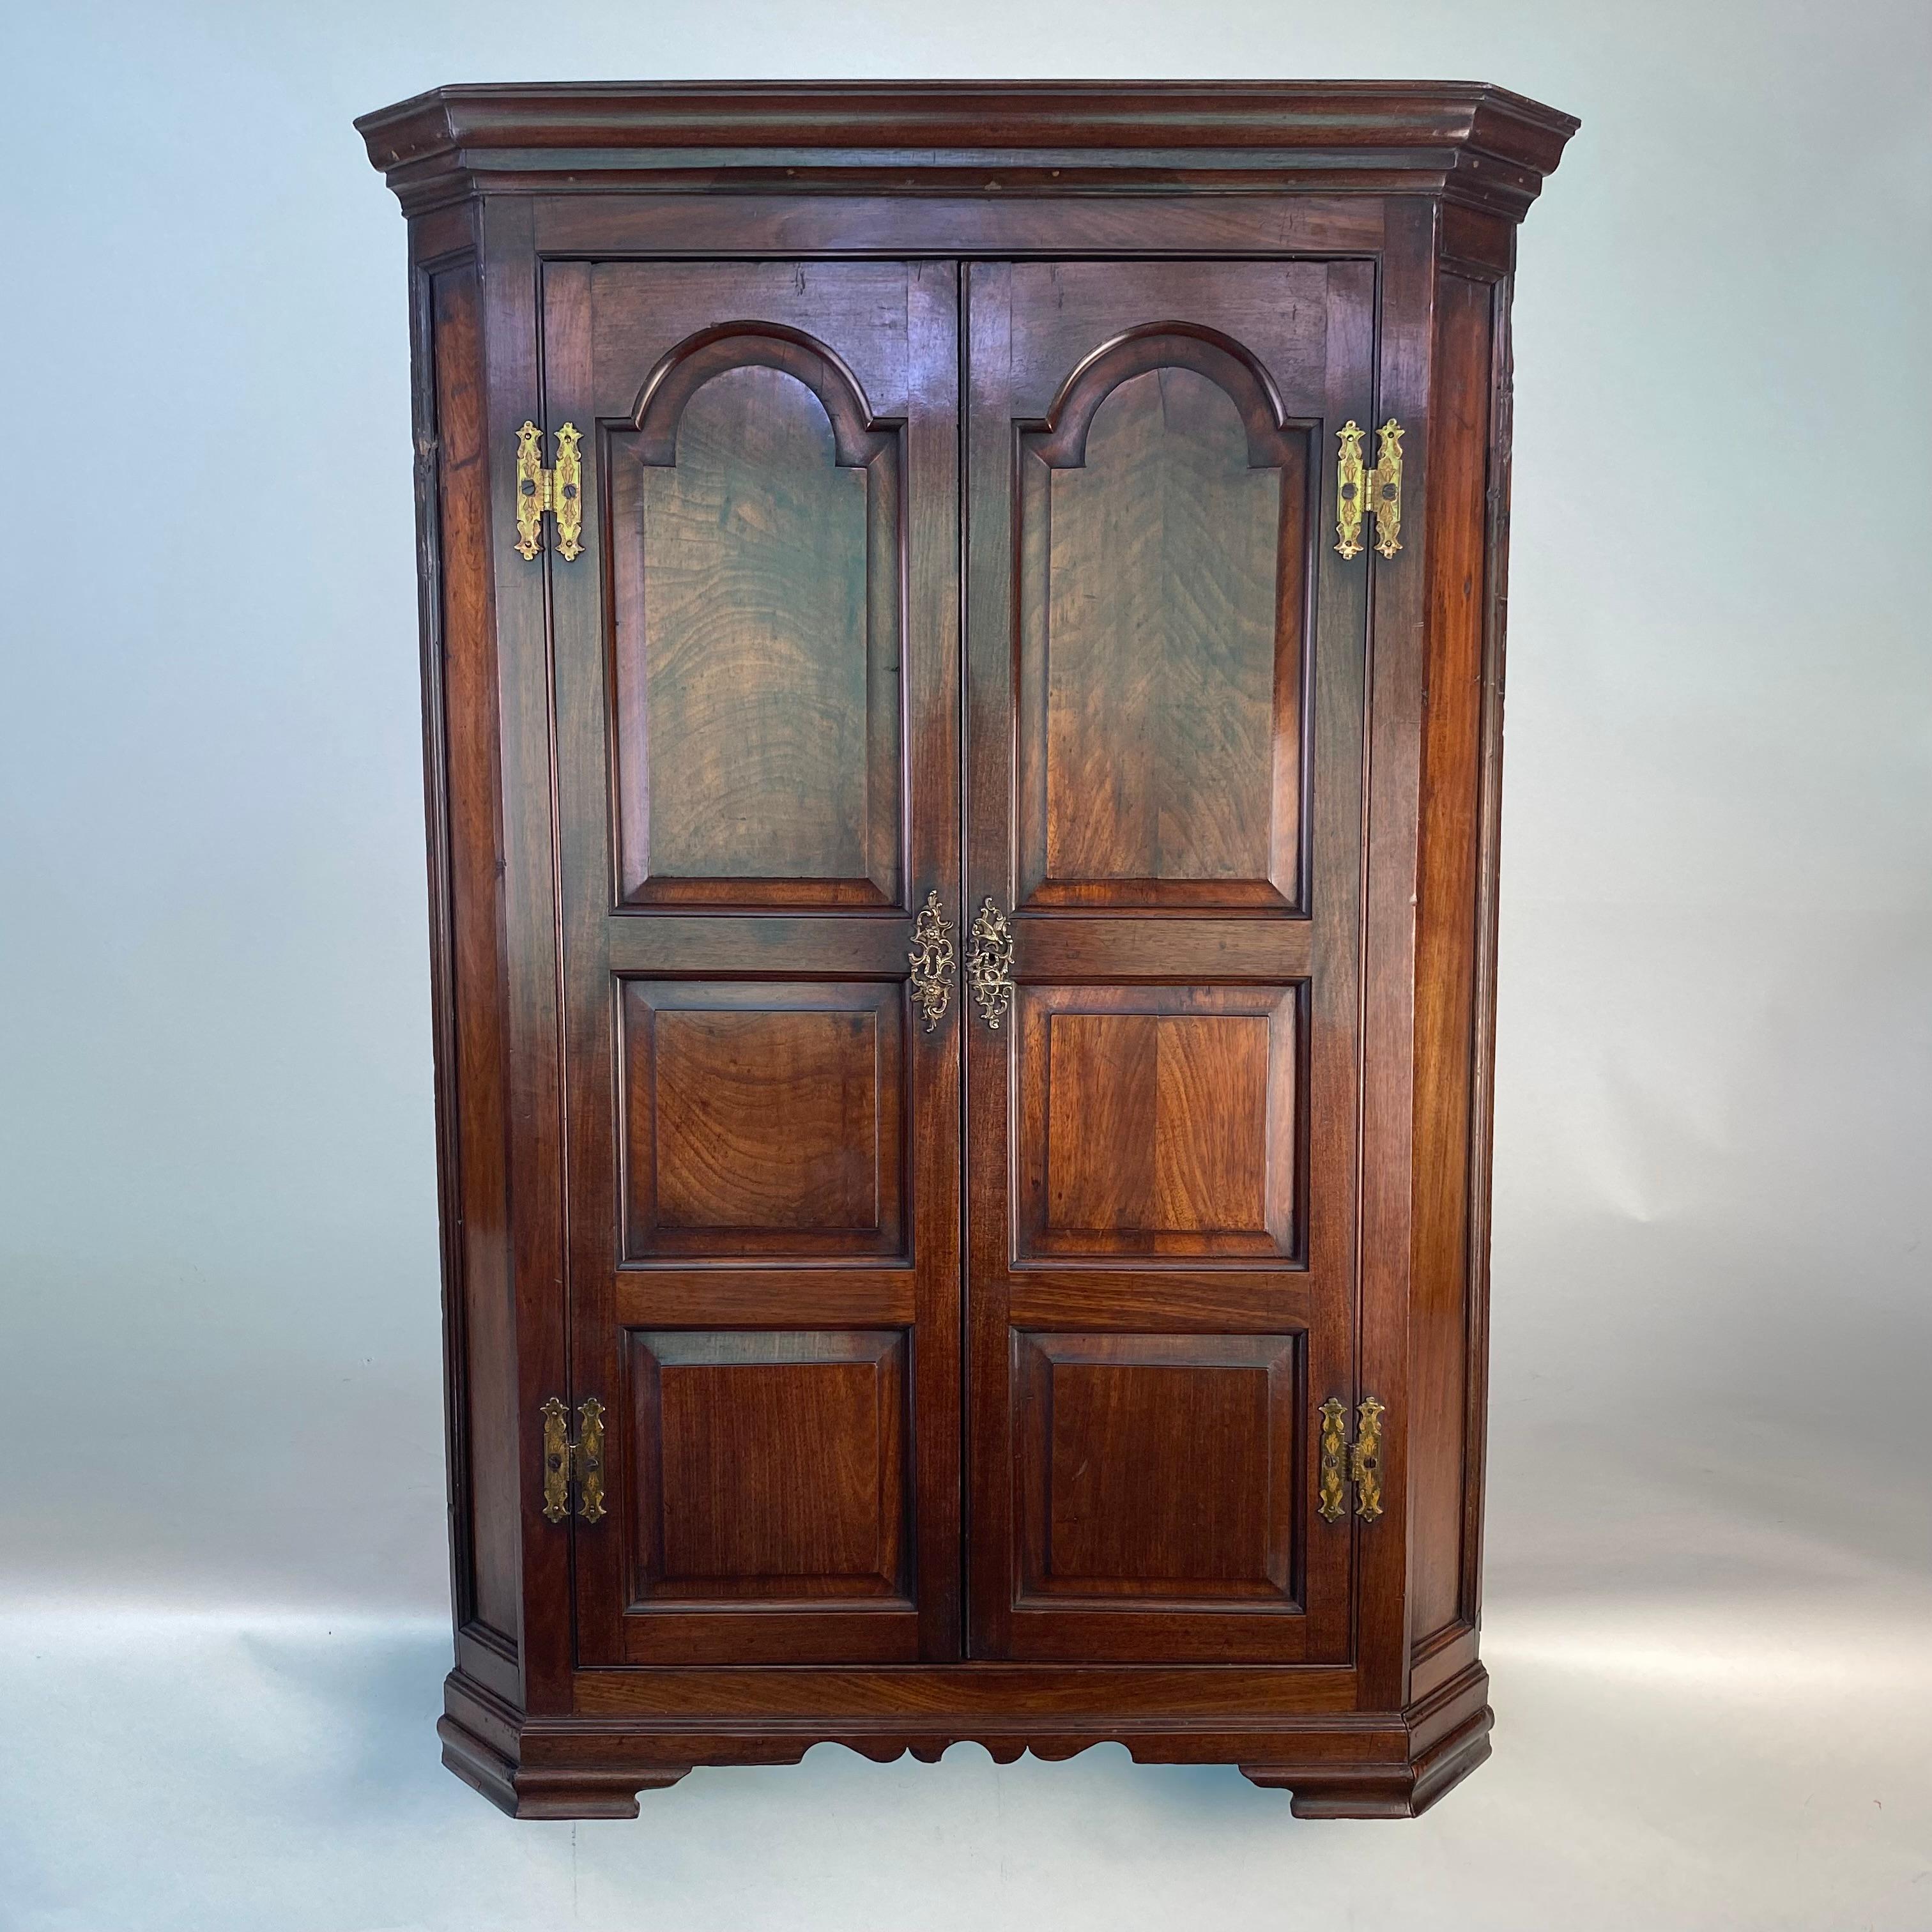 A very fine quailty George III period mahogany hanging coner cupboard.  The two doors each constructed with and arch-top fielded panel above two further fielded panels and flaked by canted side panels wth moulded cornice above and a shaped apron